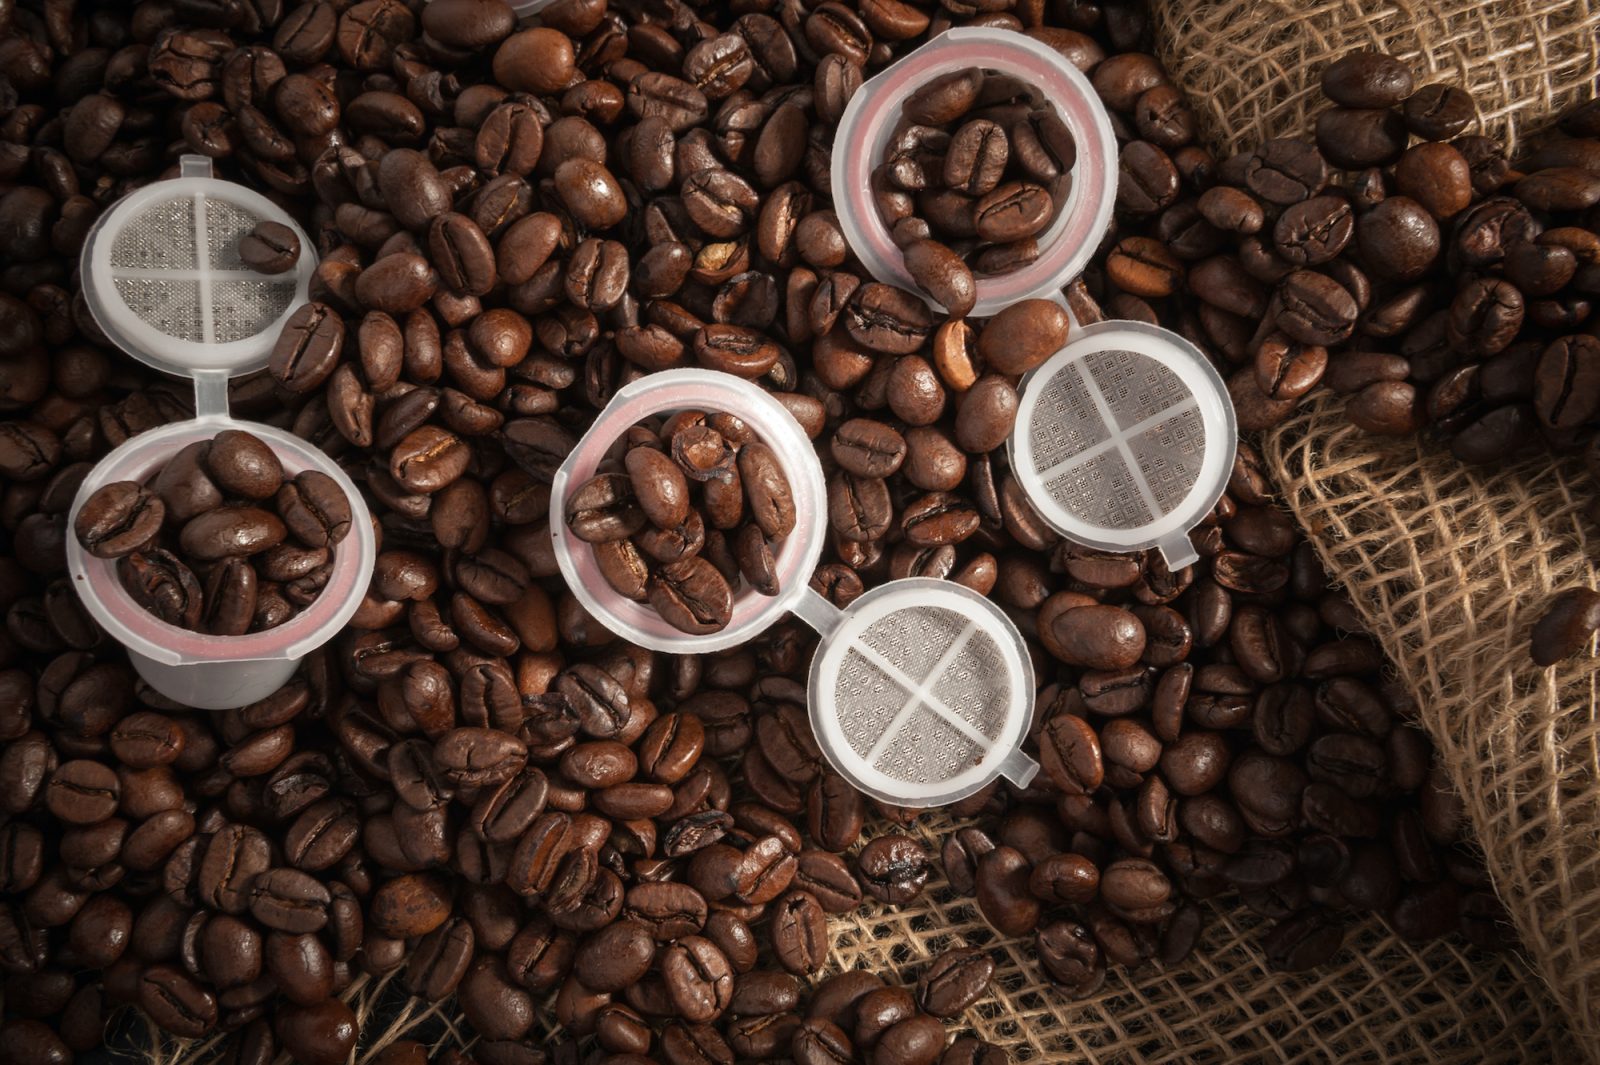 Why You Should Recycle Coffee Pods and K-Cups